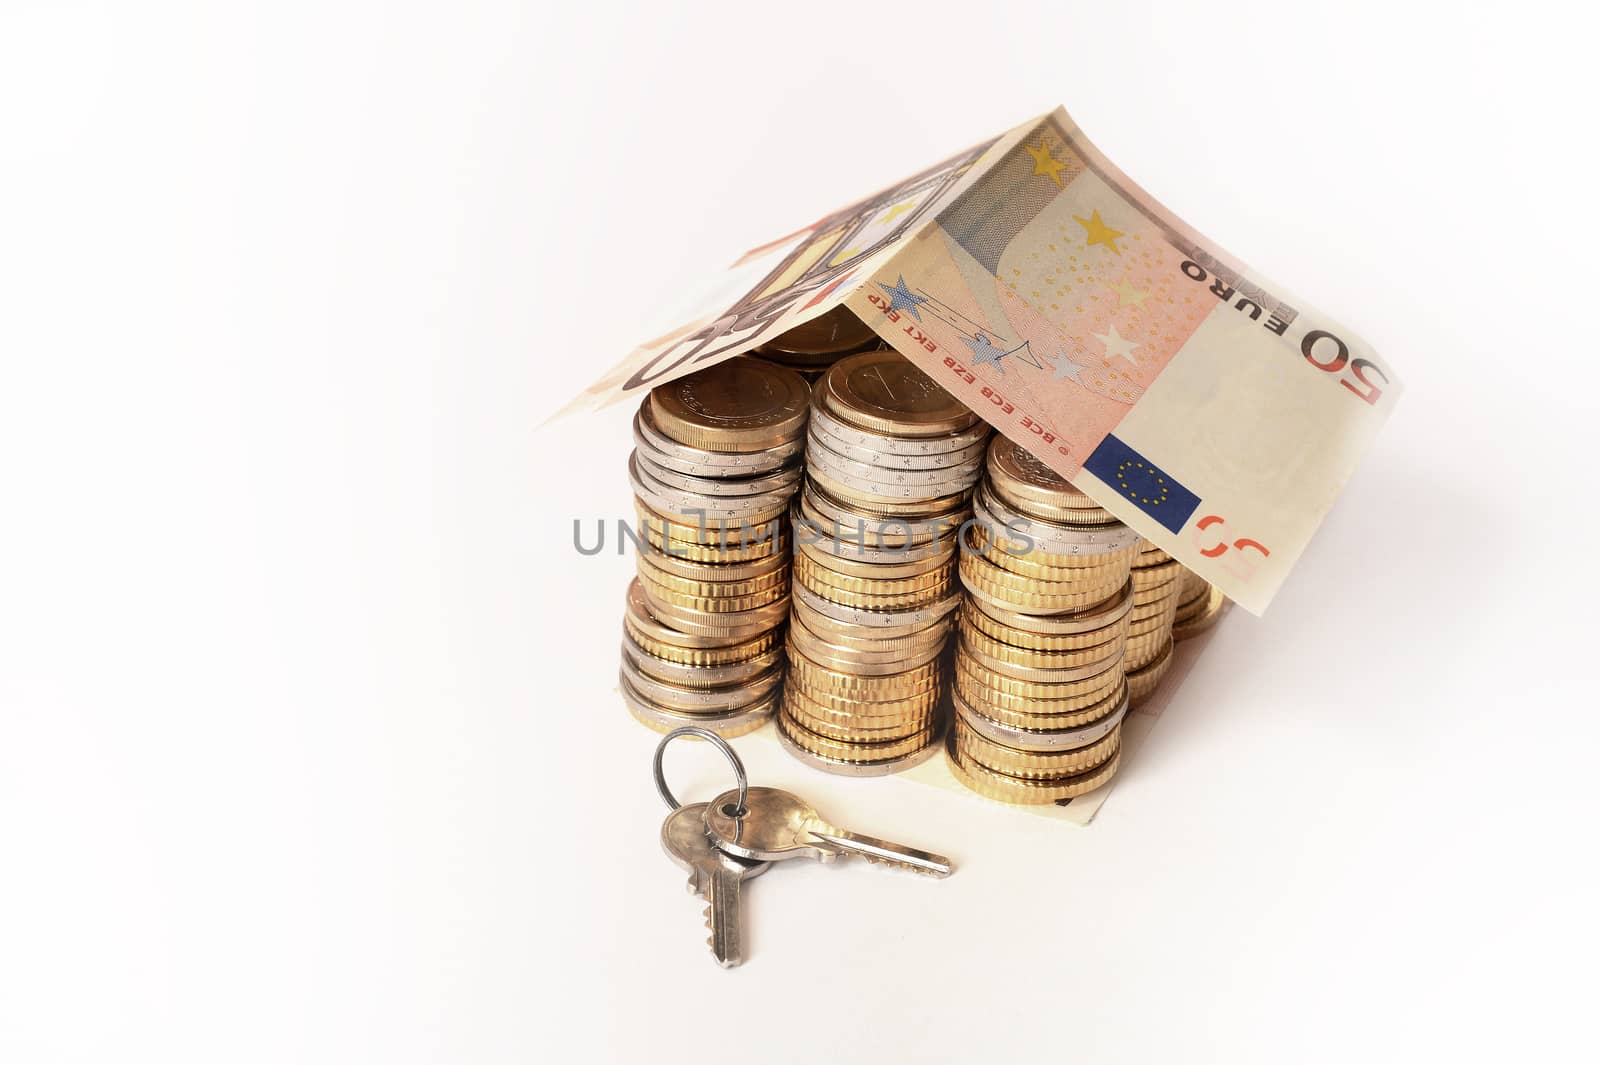 Euro Coins pile House with banknote roof and key  by ocusfocus